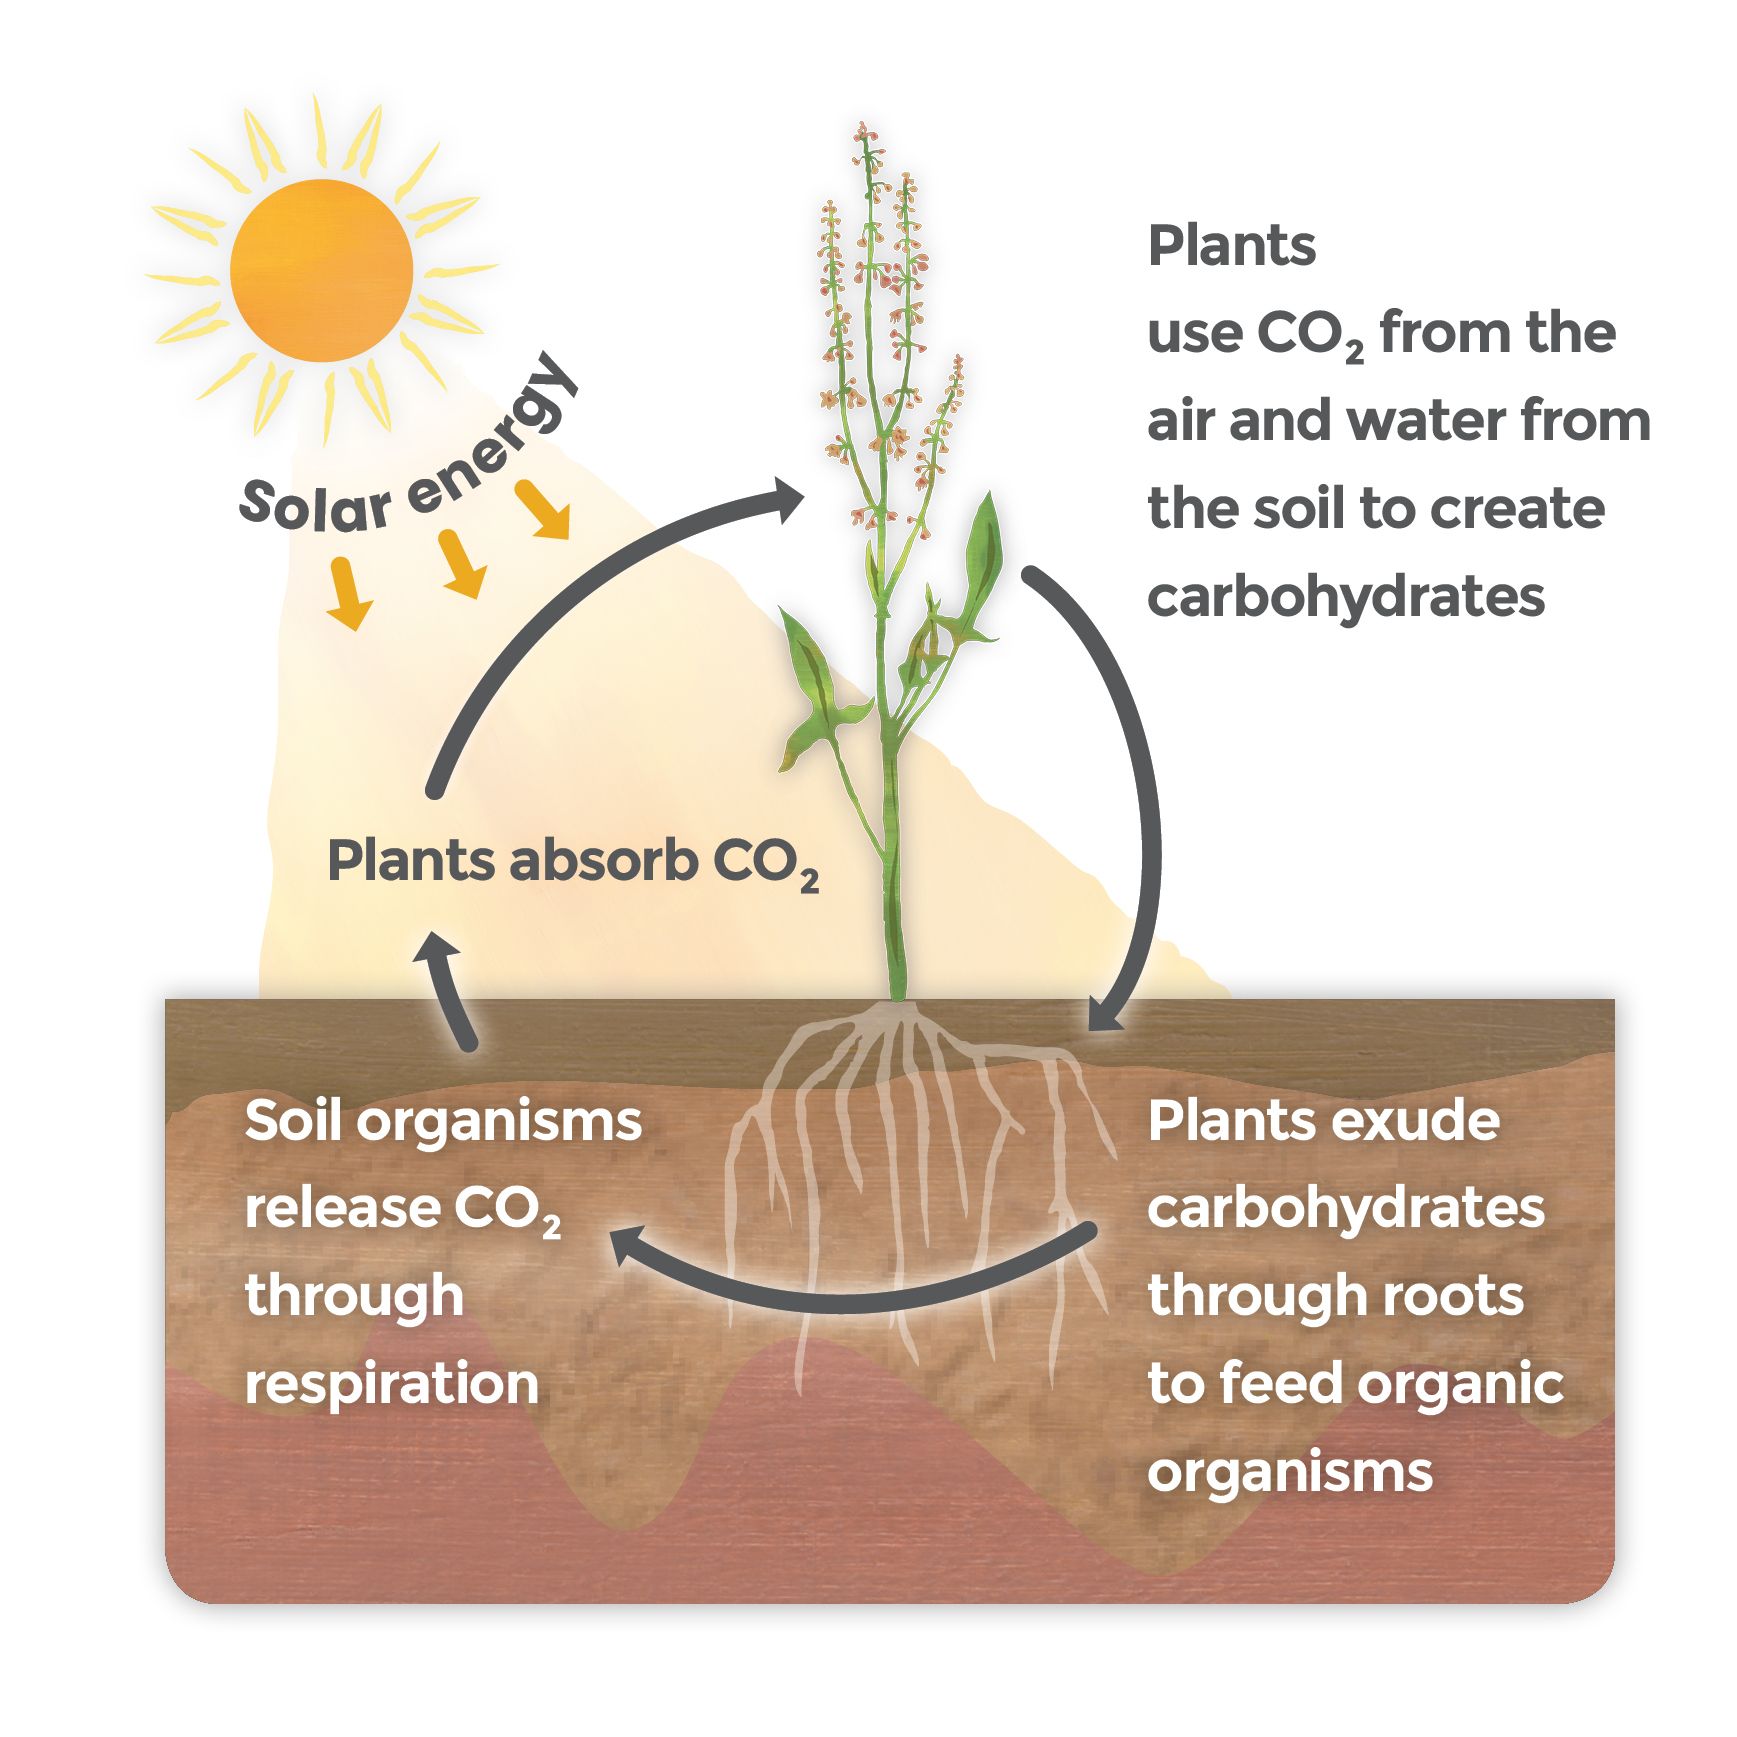 How plants fix CO2 from the air, it enters soil via roots and is released via soil organisms